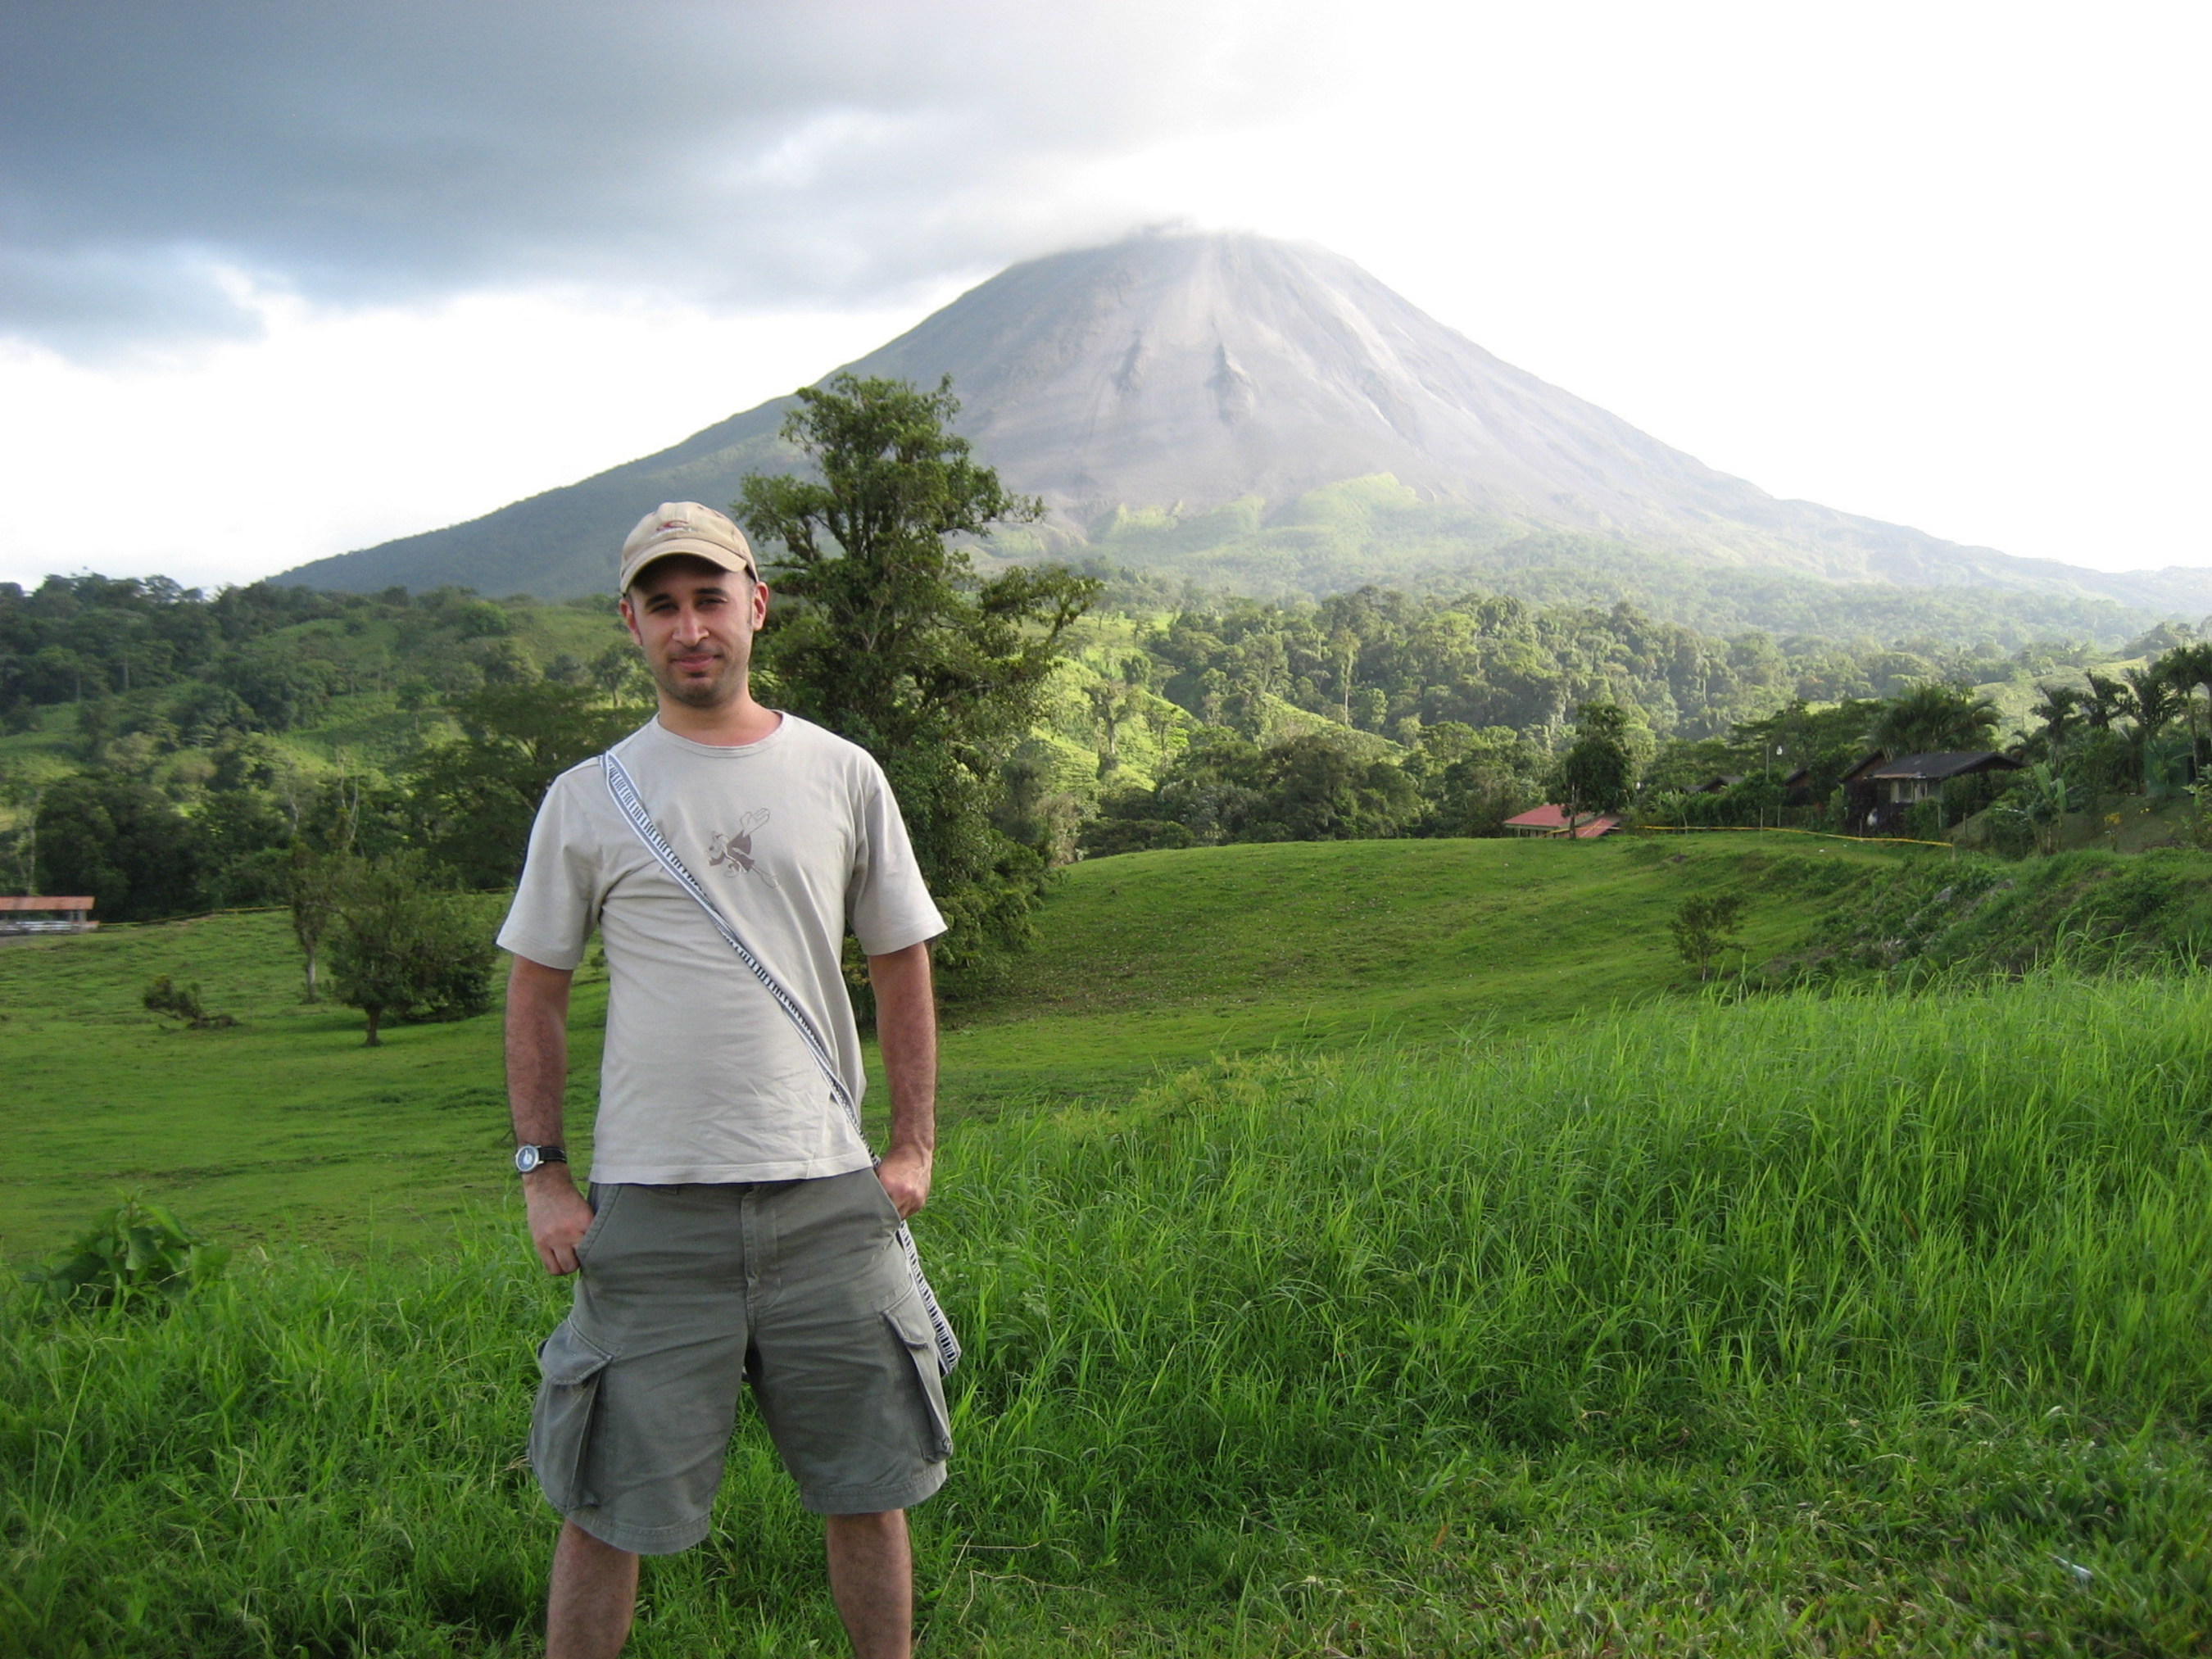 Michael Dixon pictured in Costa Rica, days before his disappearance.